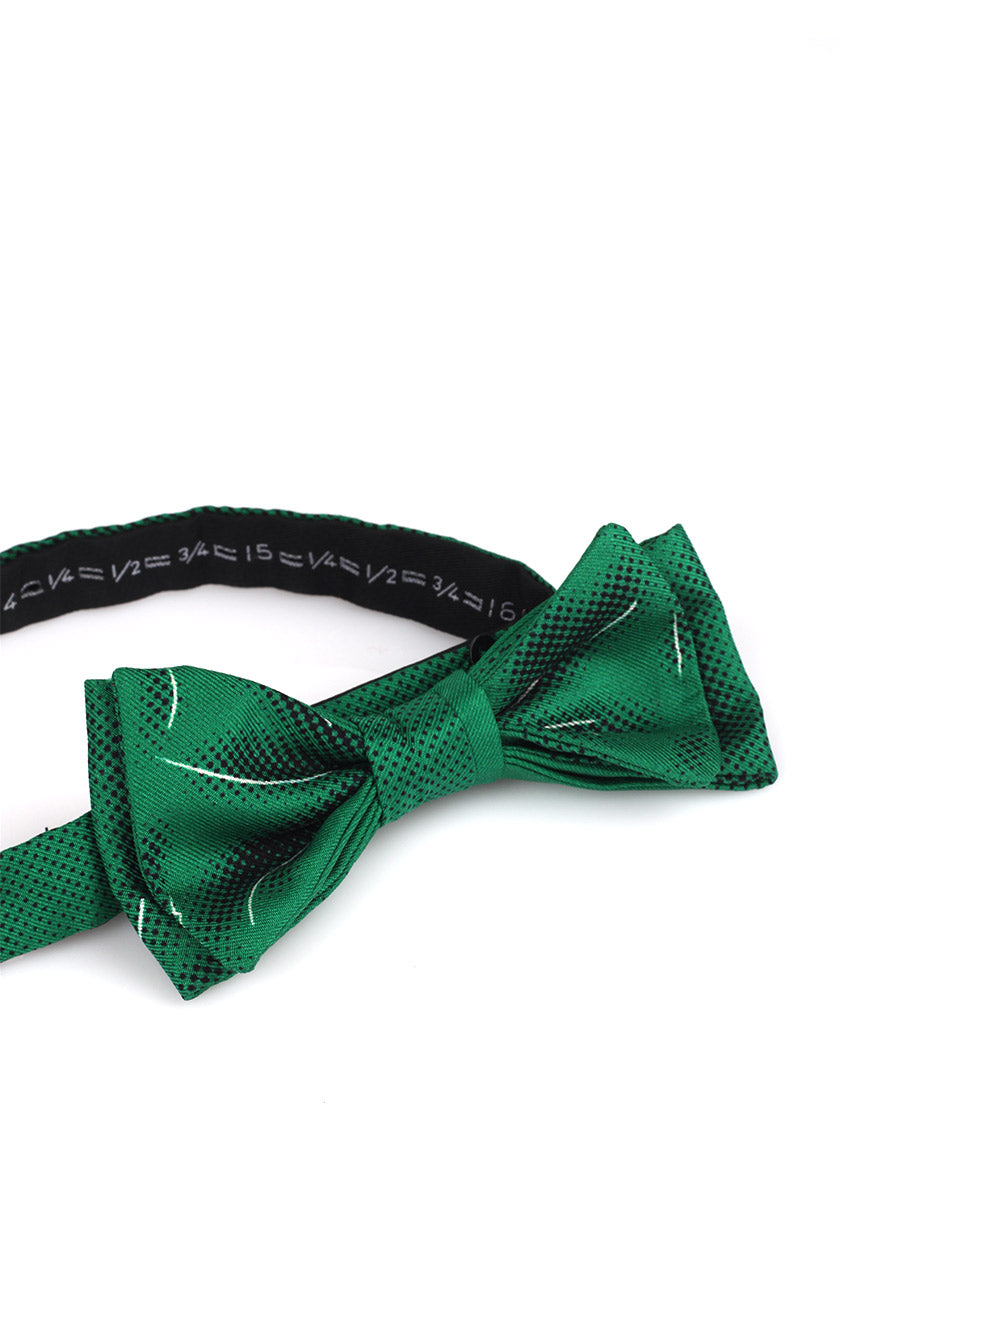 ABSTRACT GREEN BOW TIE